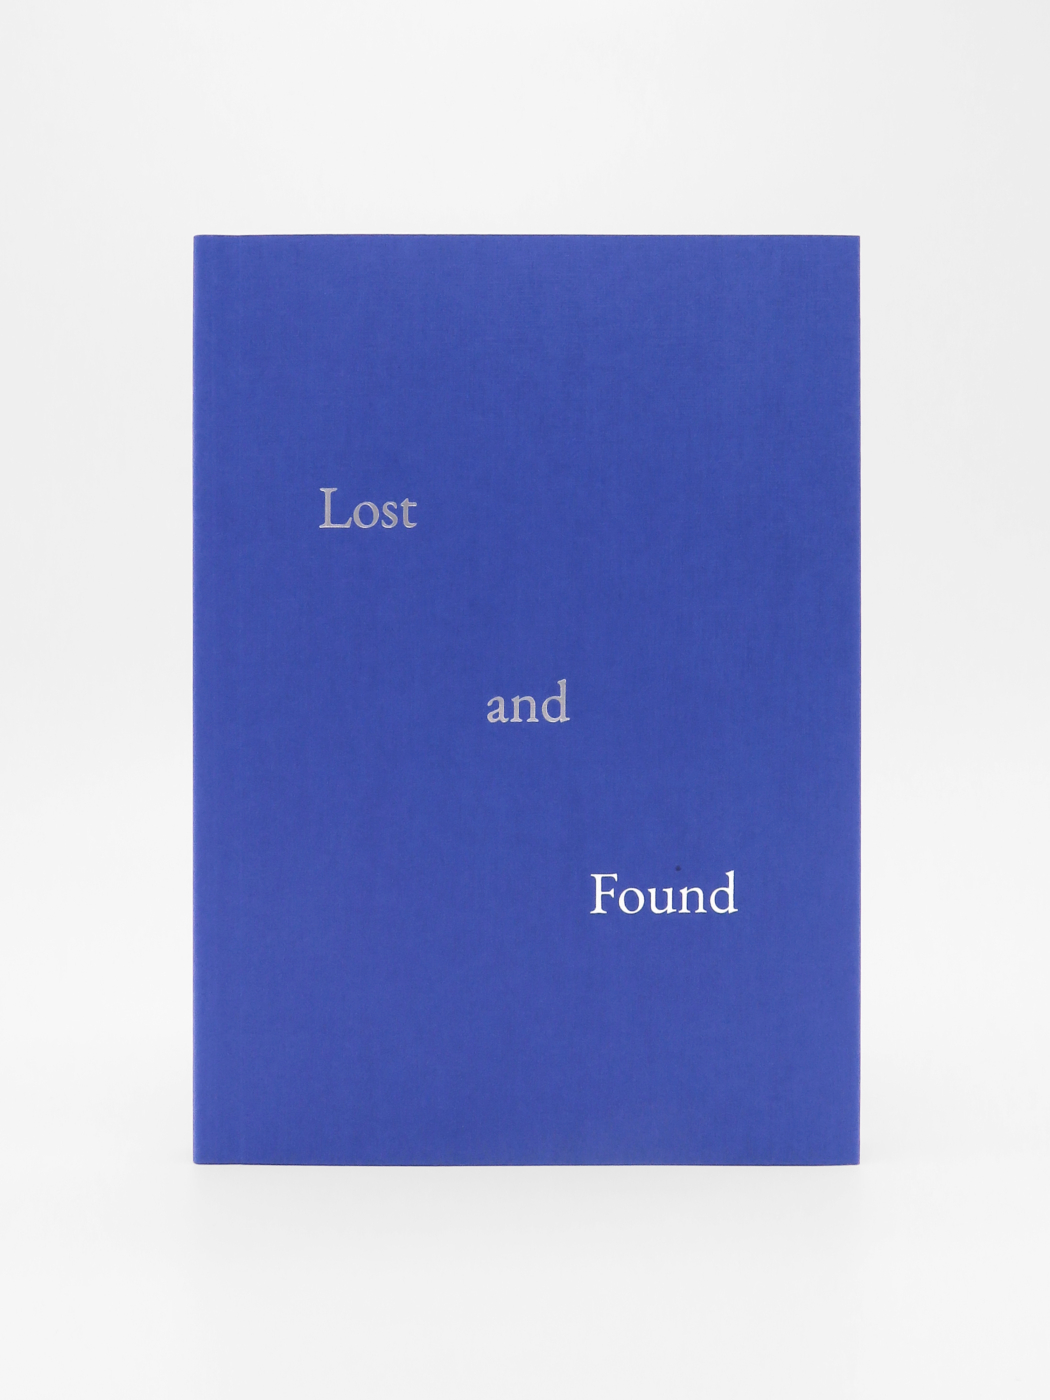 Sally J. Han, Lost and Found